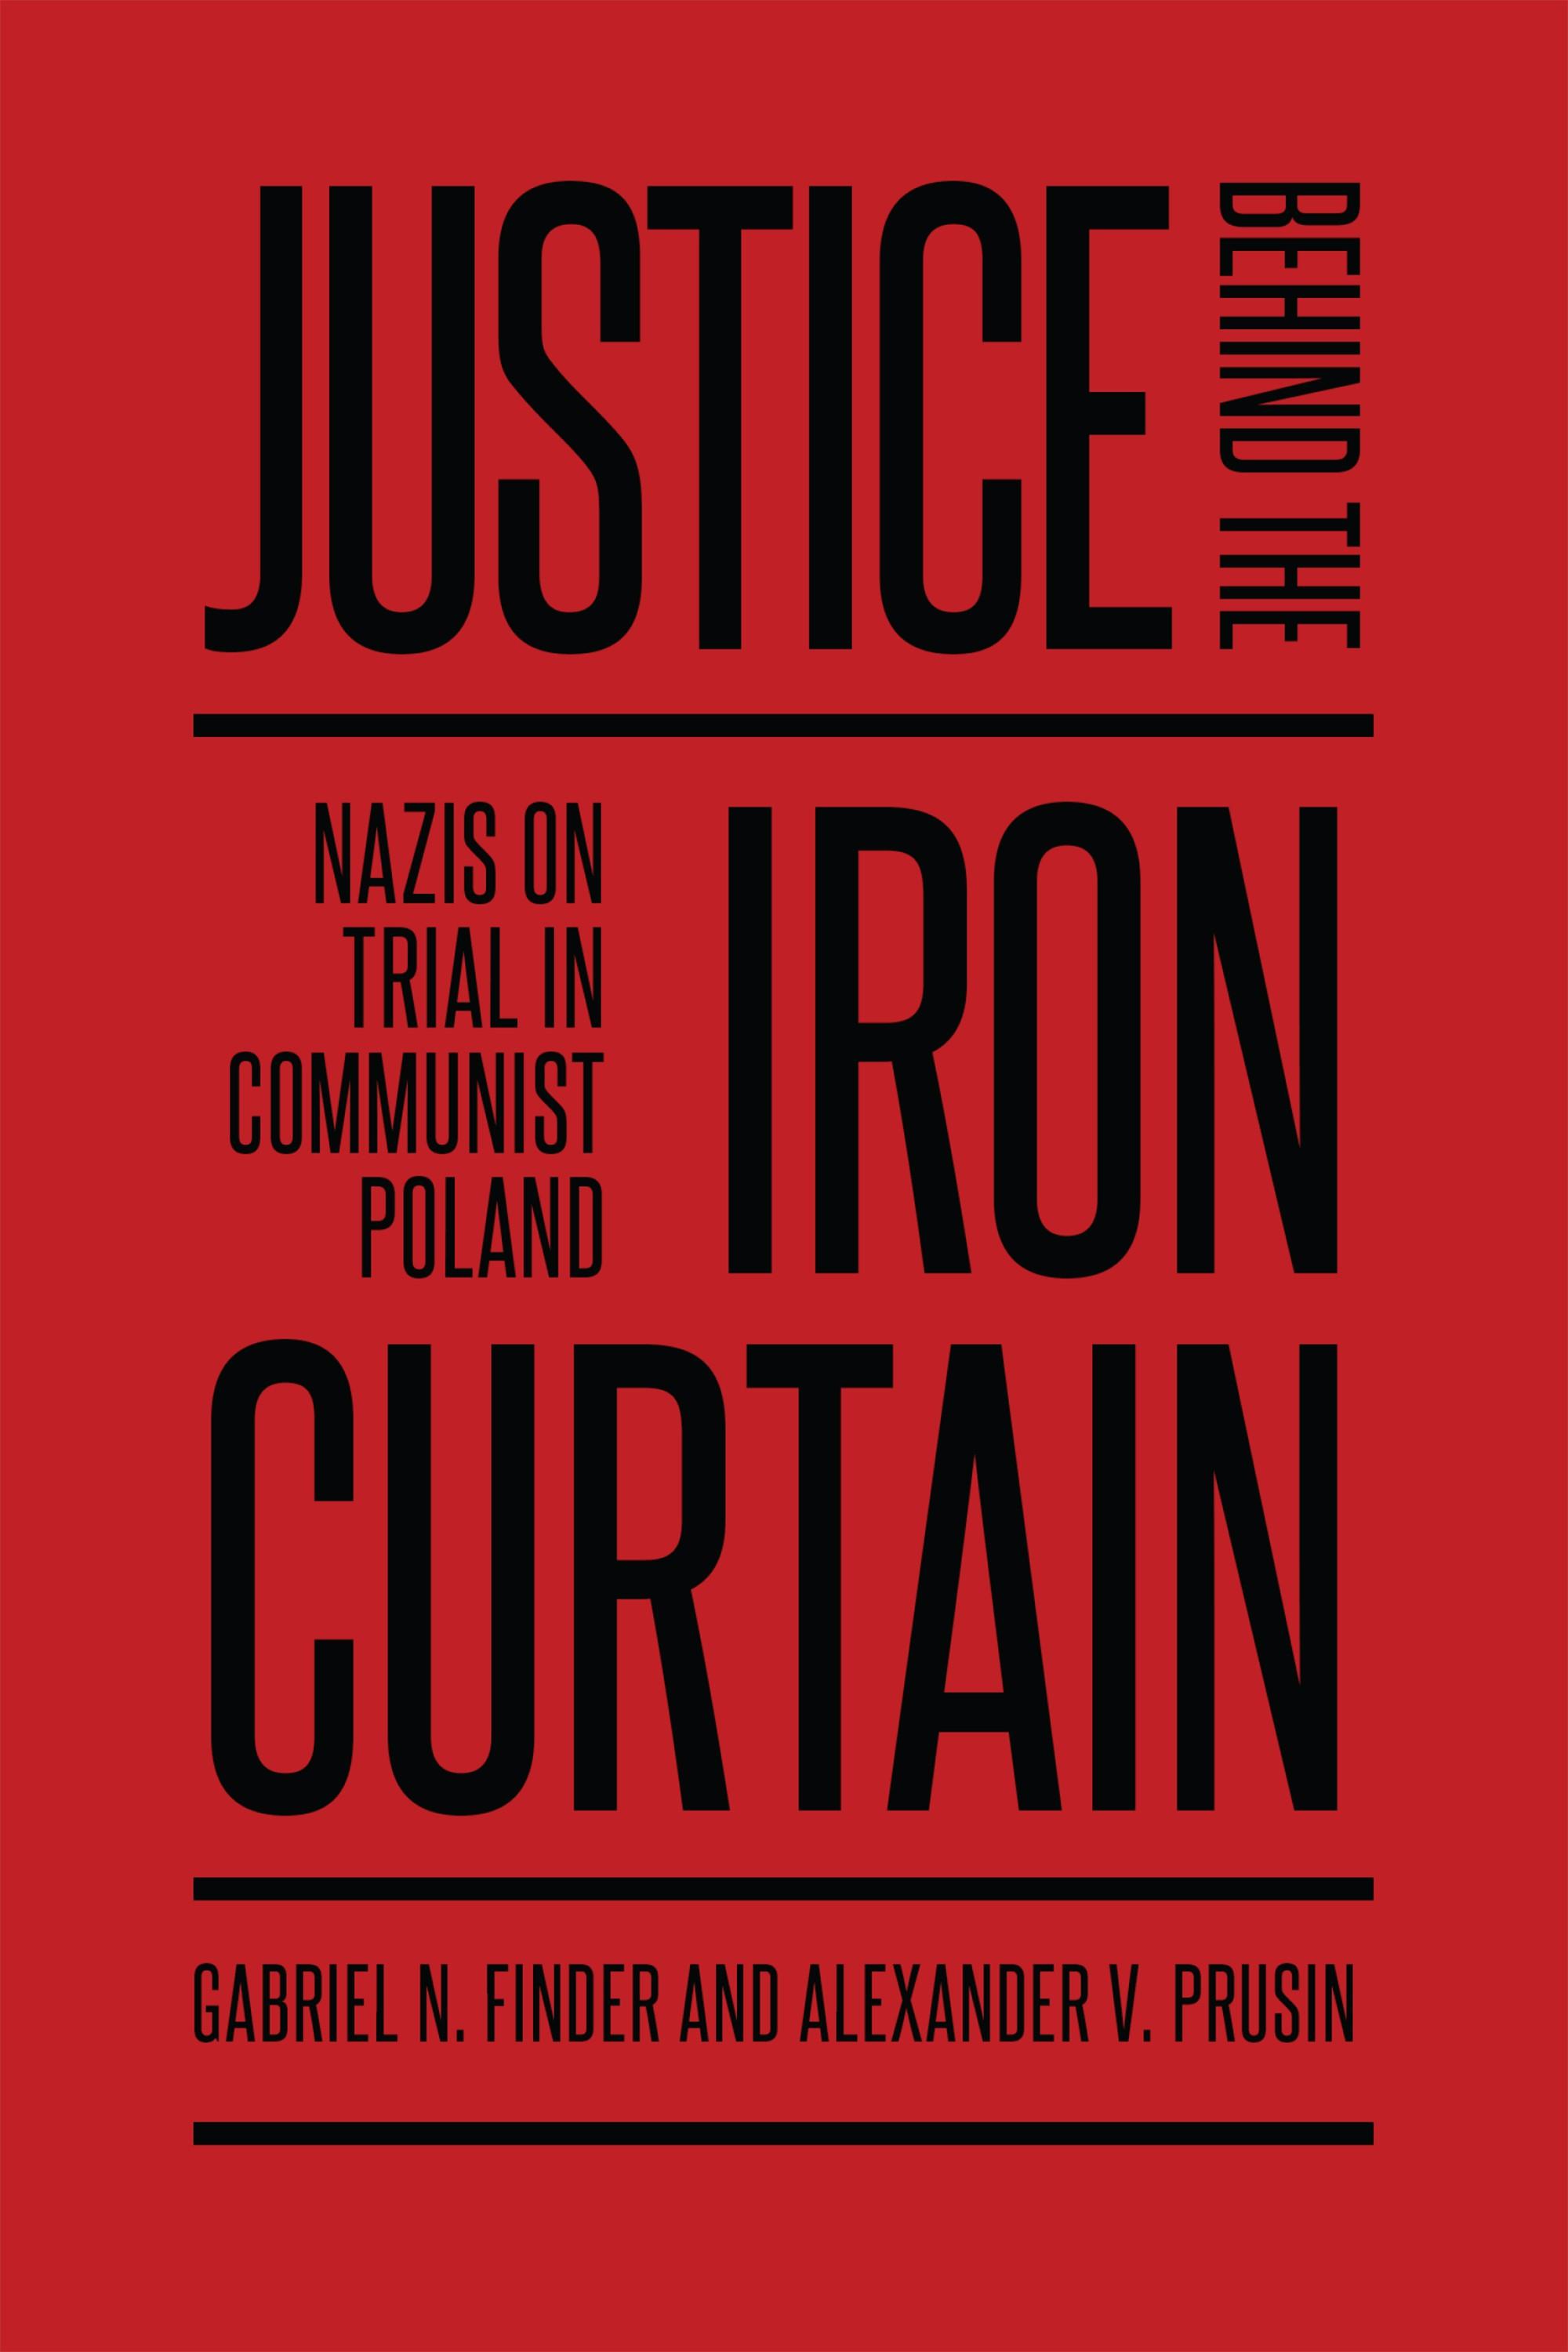 Justice Behind the Iron Curtain